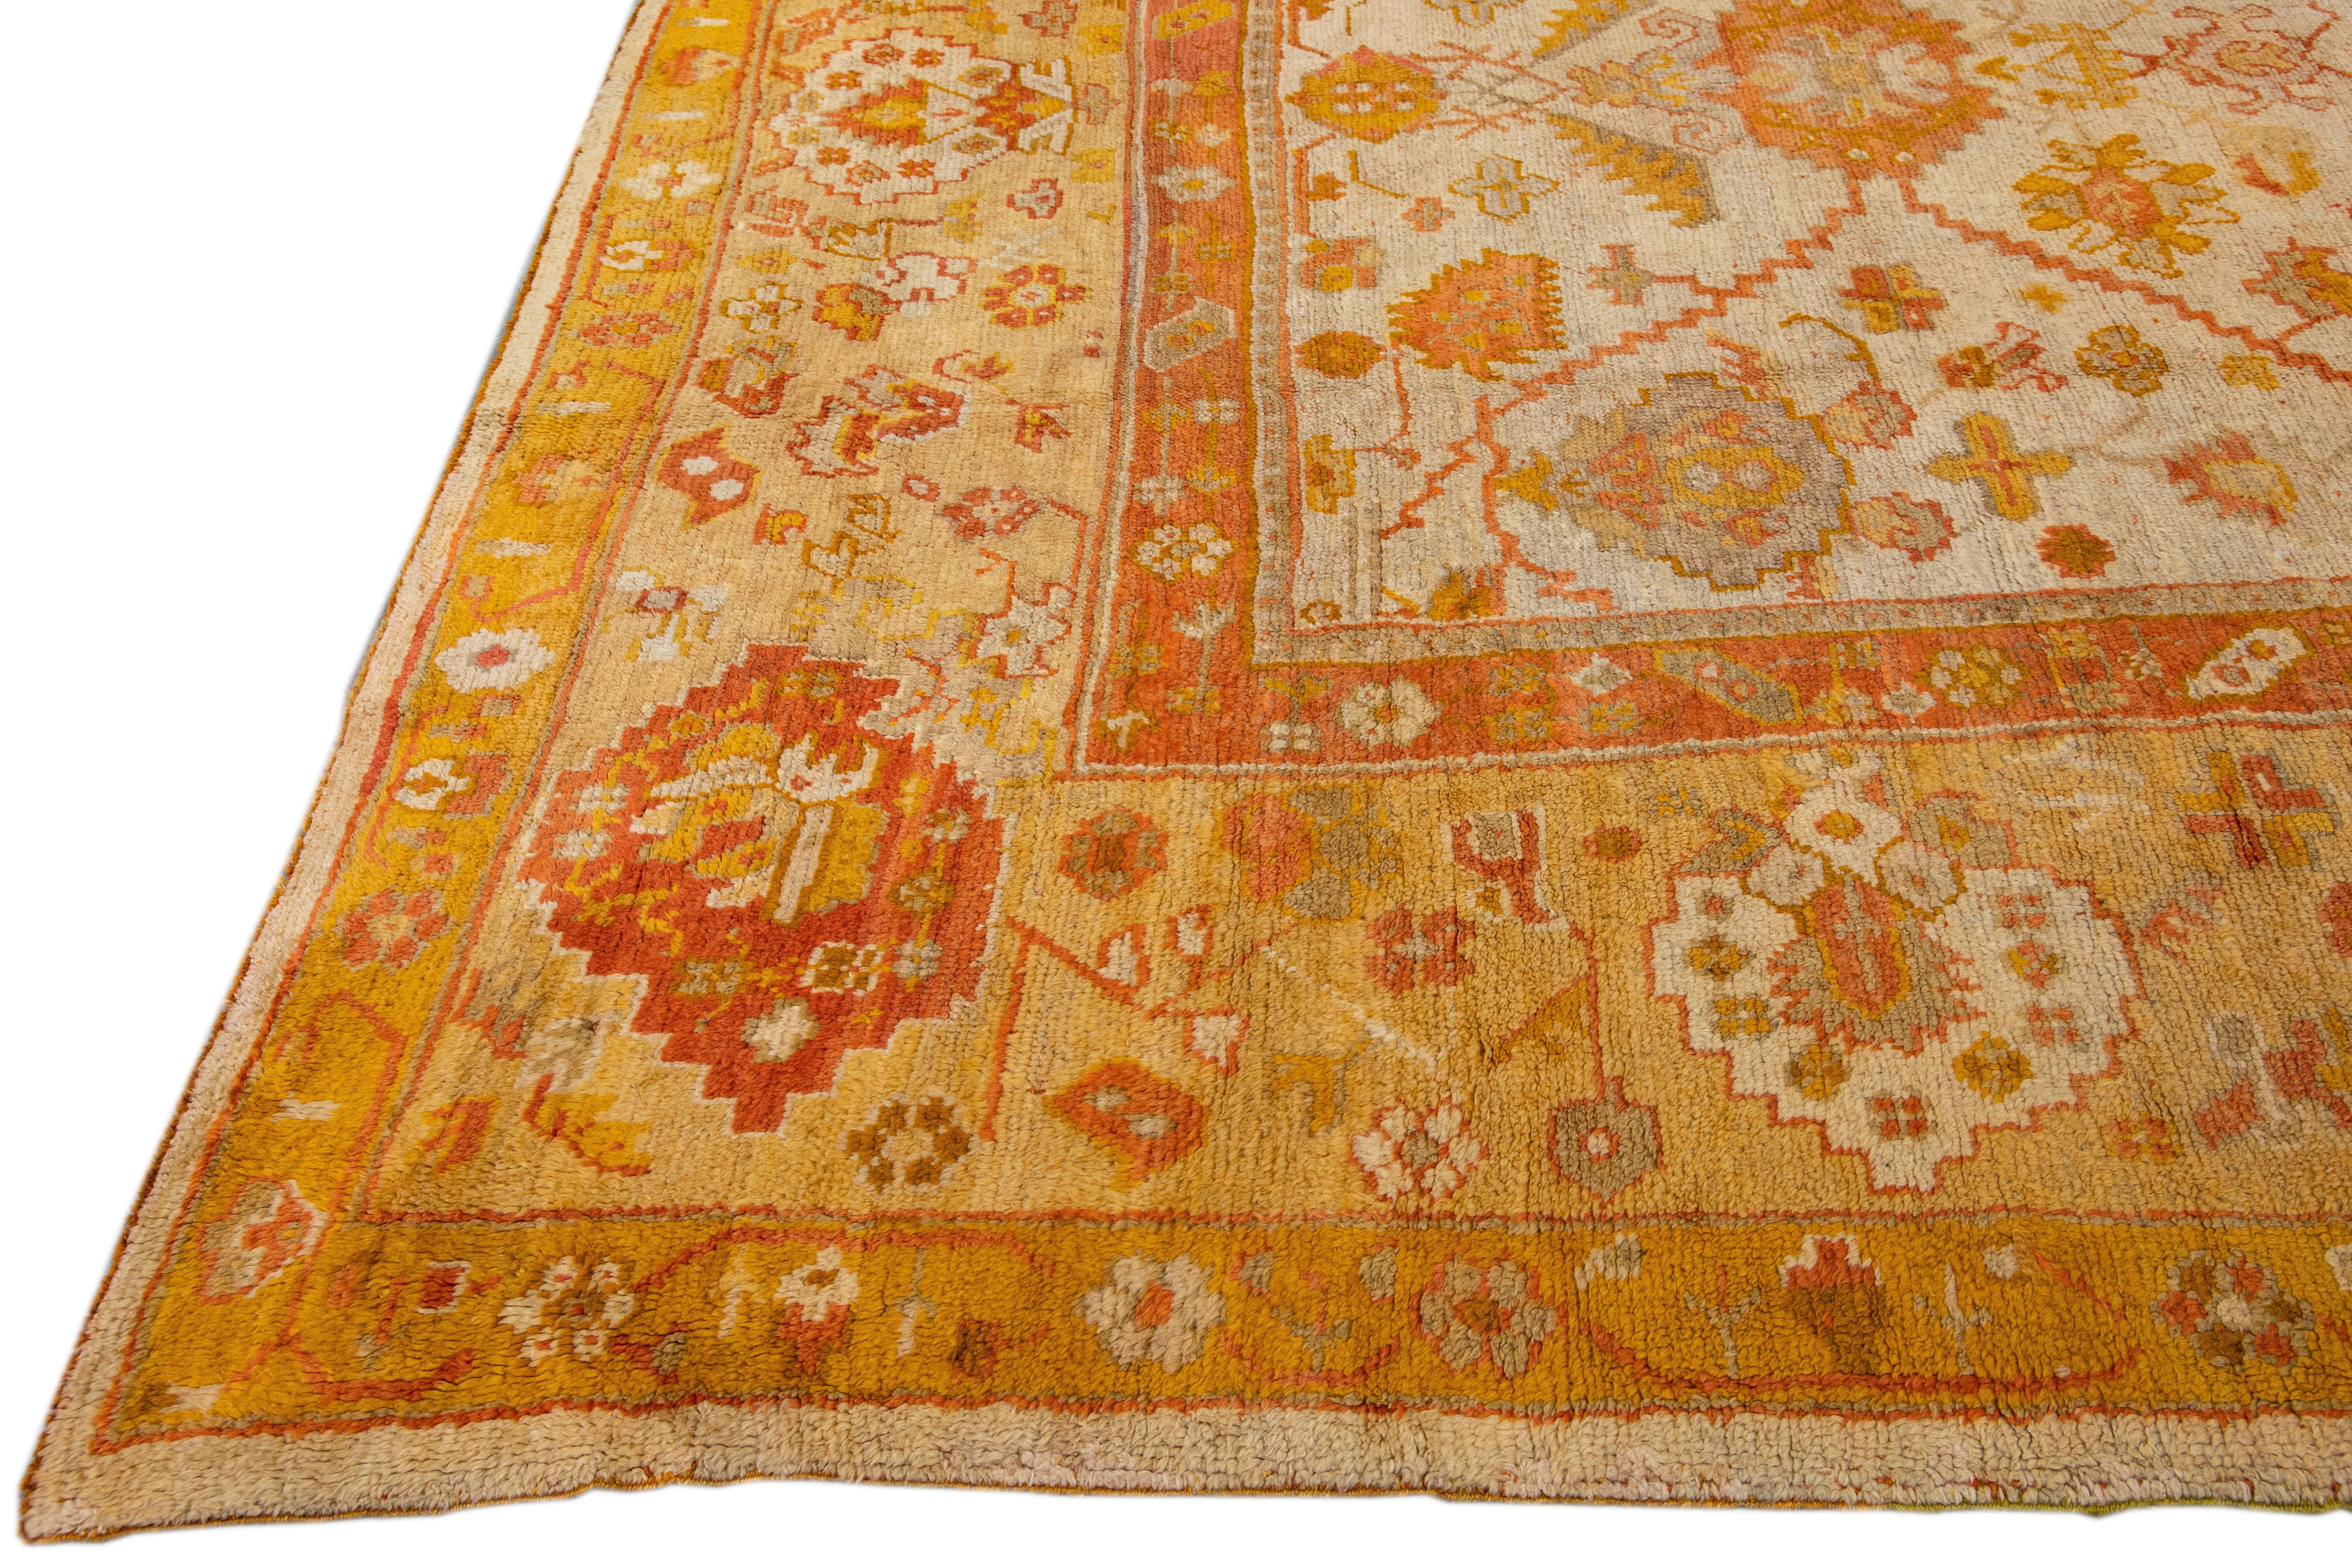 Antique Turkish Oushak Handmade Allover Designed Beige and Orange Wool Rug In Excellent Condition For Sale In Norwalk, CT